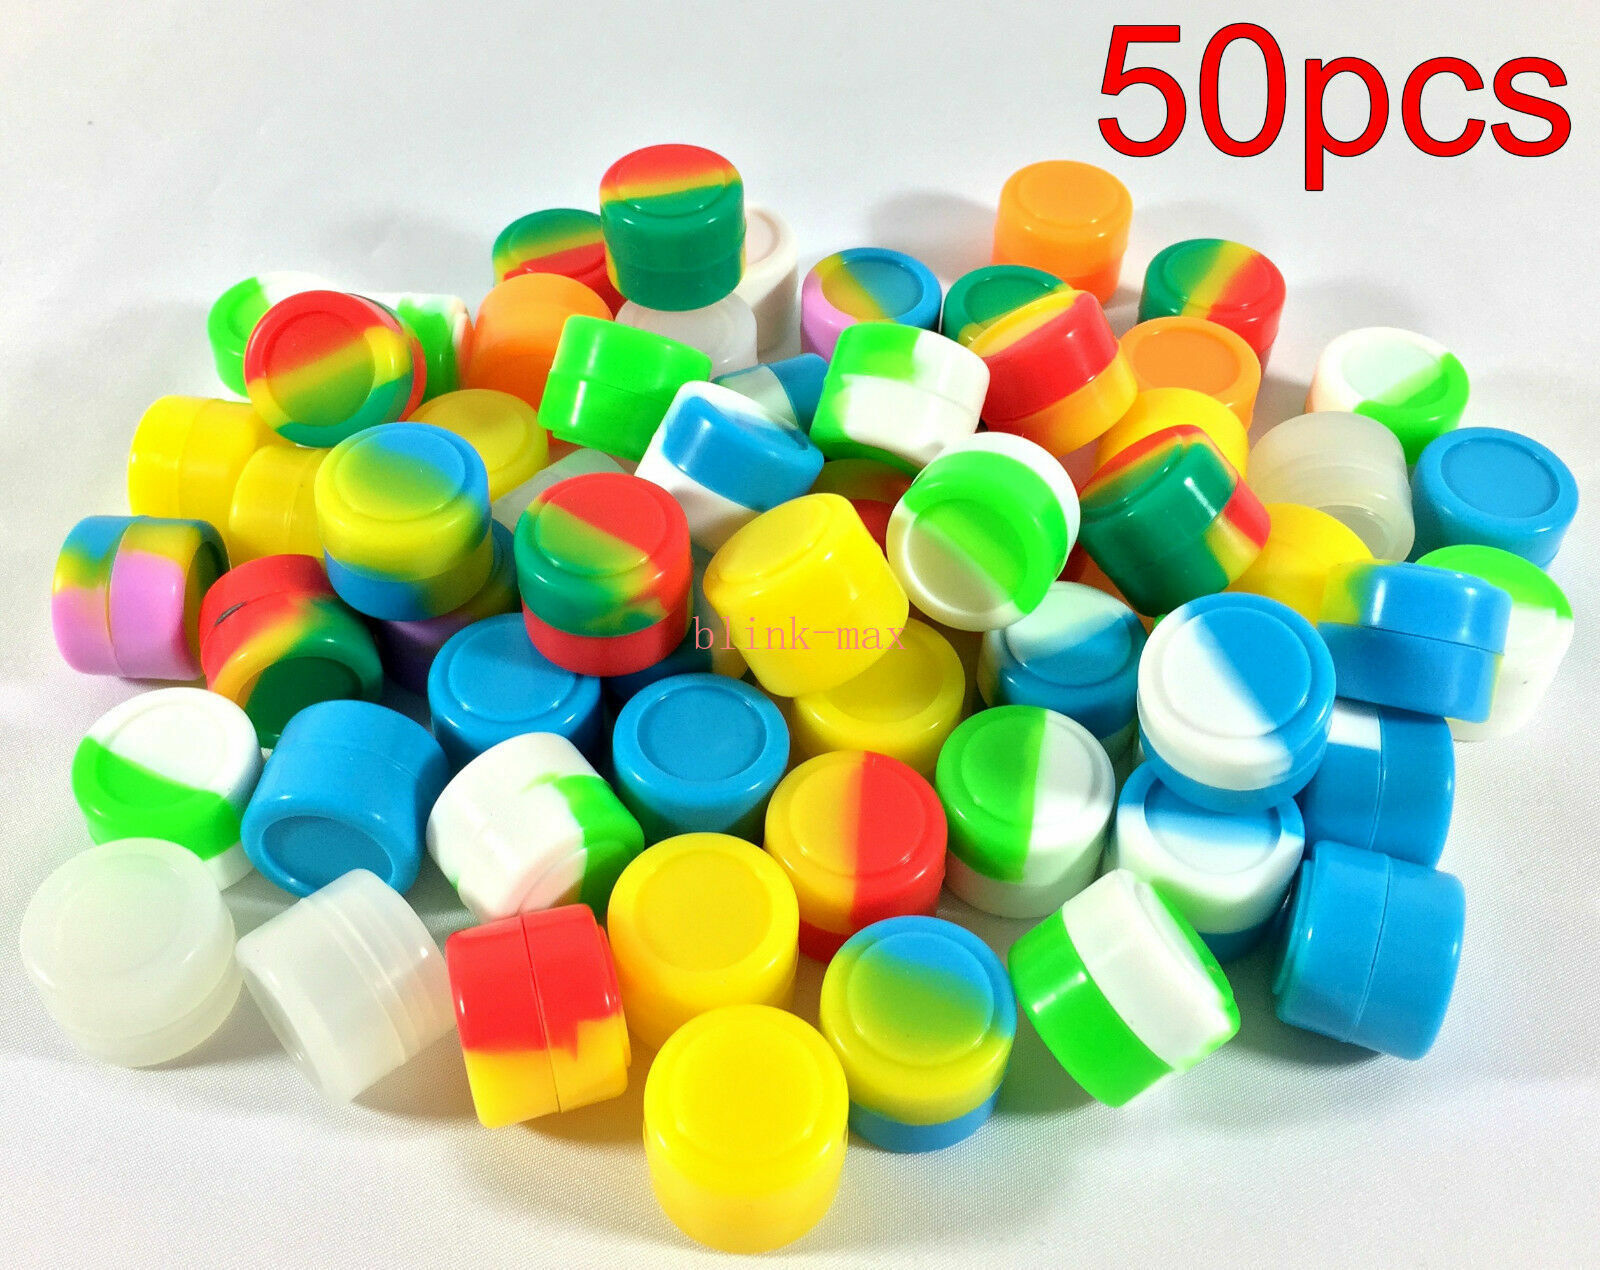 50pcs 2ml Silicone Container Jar Non-Stick Mixed Colors Round Wholesale Lot